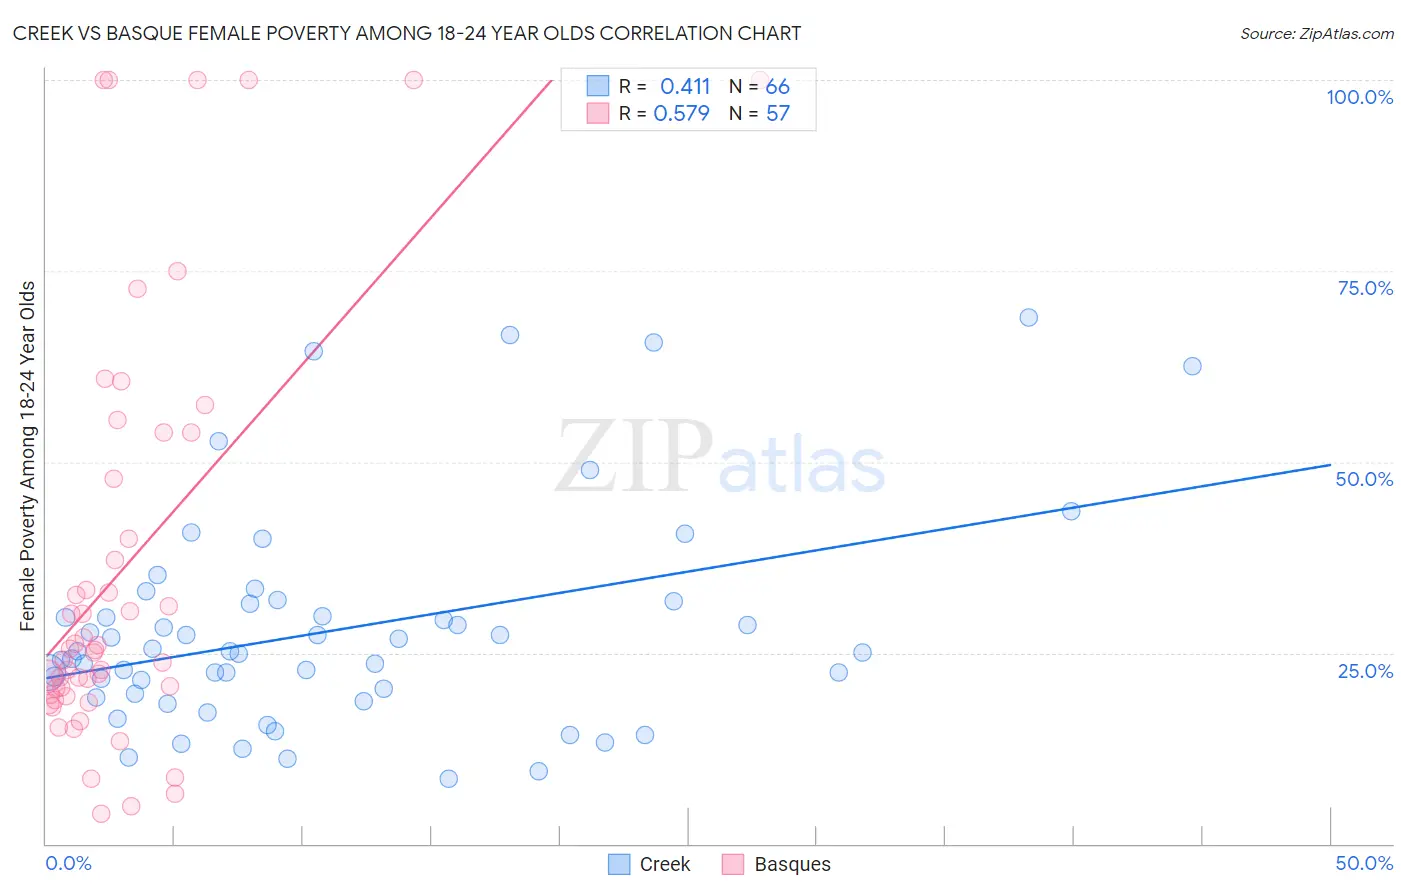 Creek vs Basque Female Poverty Among 18-24 Year Olds